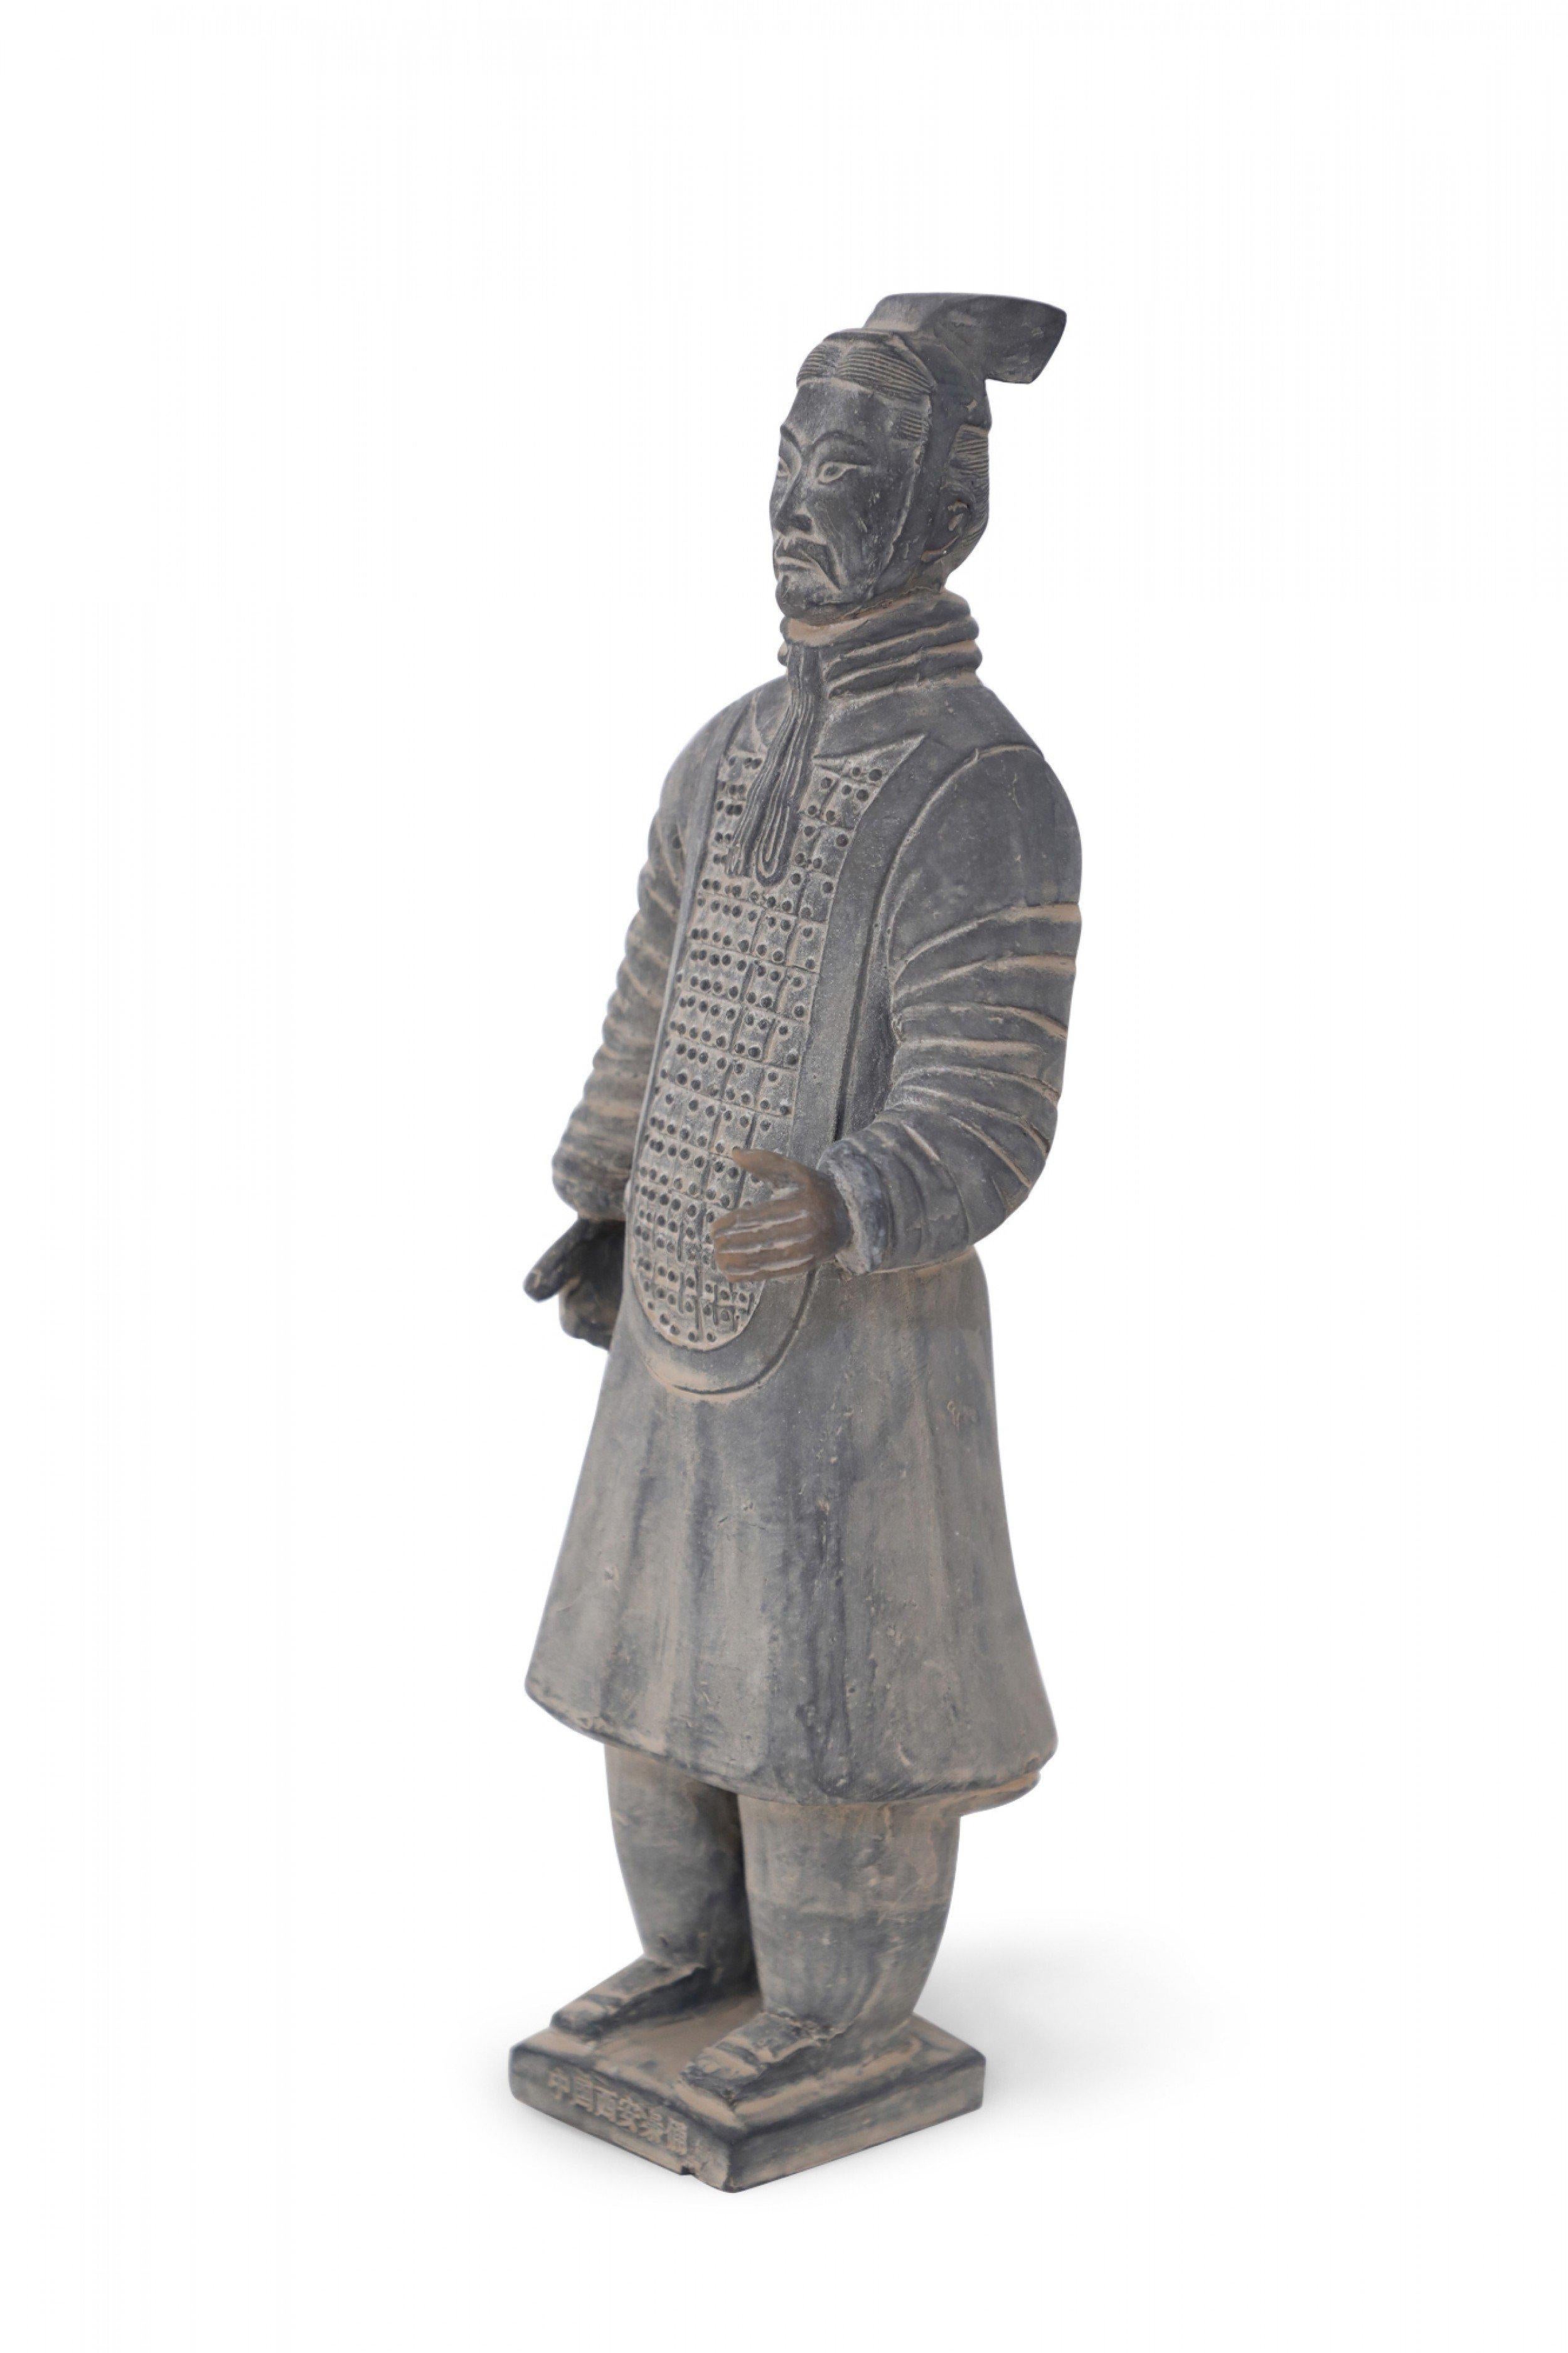 Antique Chinese terracotta warrior figure modeled after one of the 7,000 warriors that form the Terracotta Army in the Mausoleum of the First Qin Emperor, Shi Huang.
 